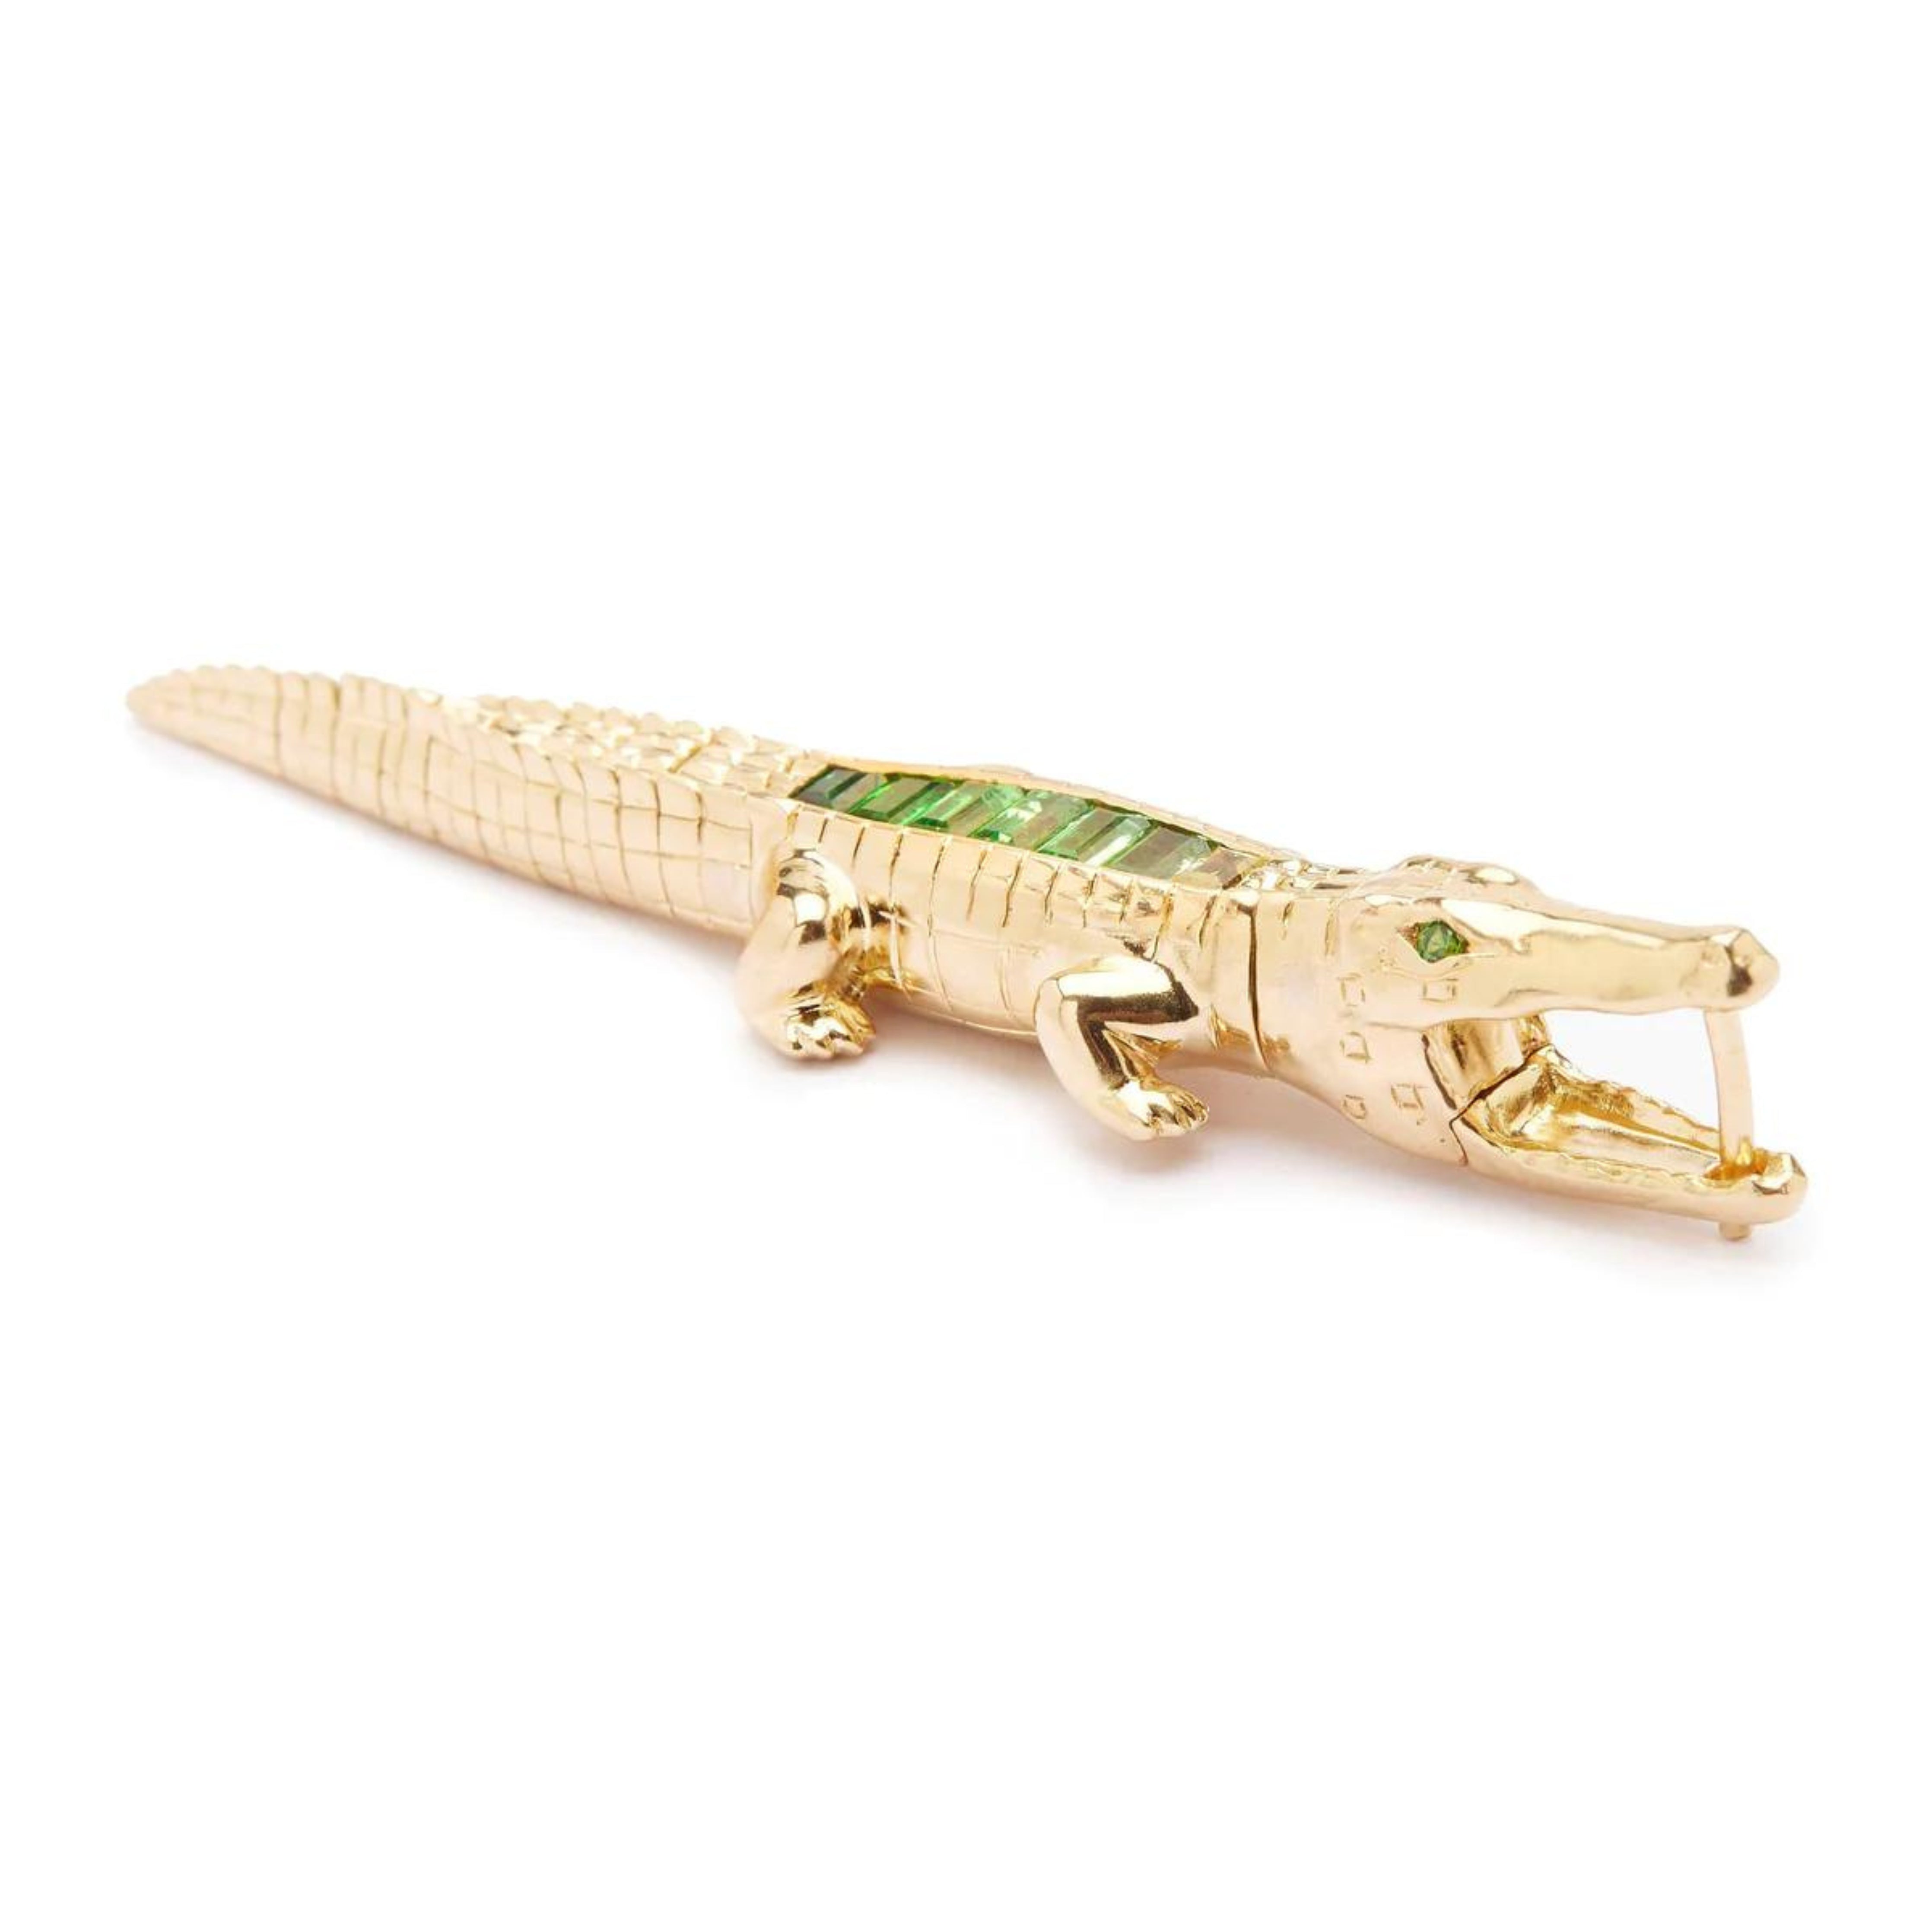 Bibi ven der Velden, Tsavorite Alligator Ear Bite Earring  Crafted in 18K yellow gold and featuring an arrangement of green tsavorites, the intricately carved design replicates an alligator's body. Shown from the side.